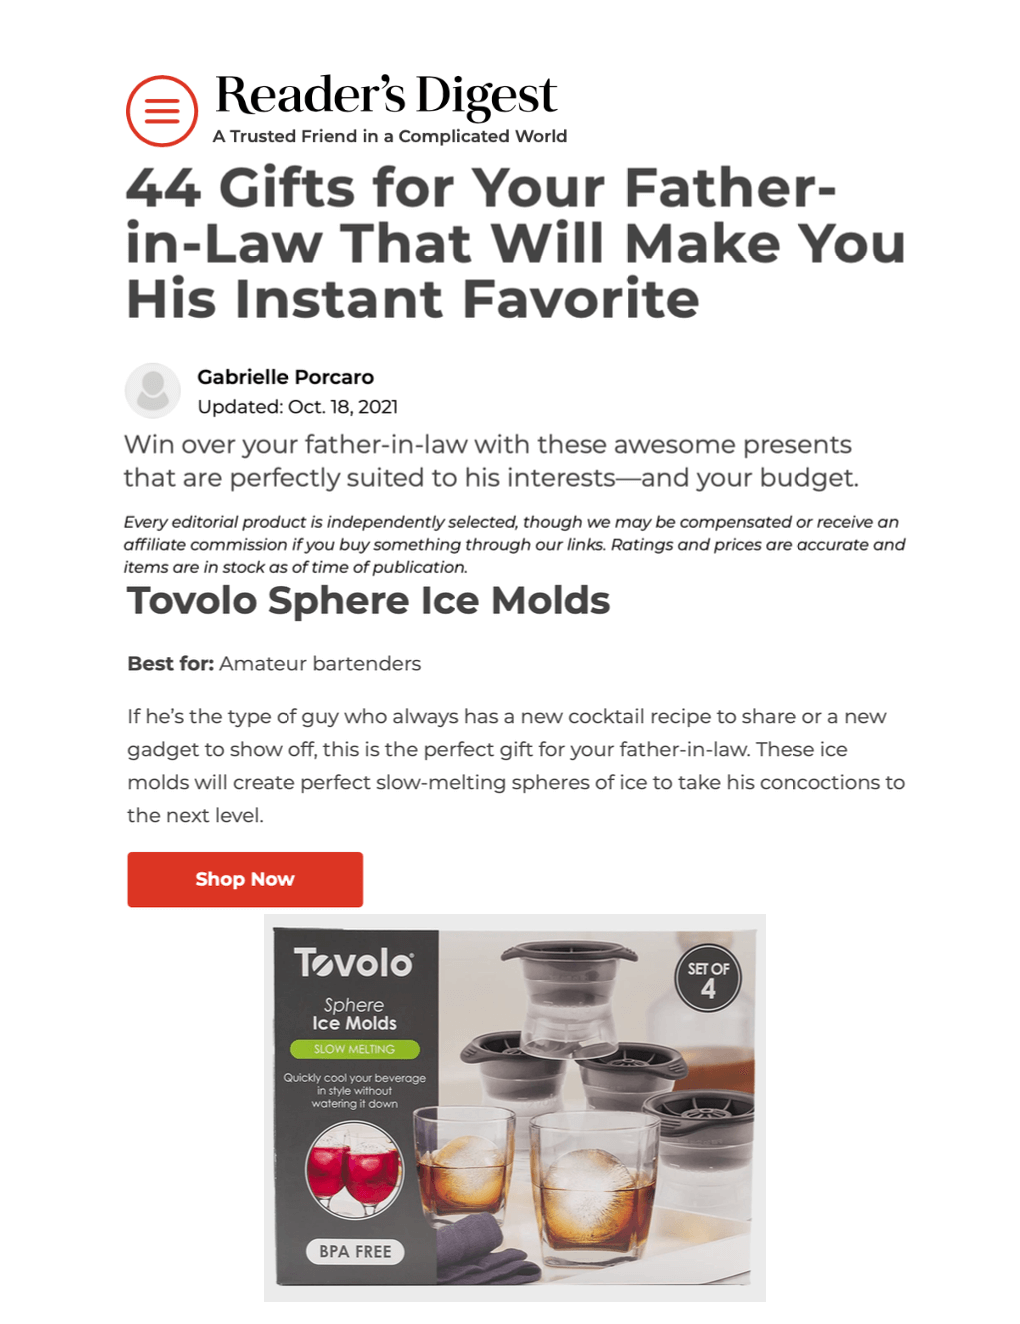 44 Gifts for Your Father-in-Law That Will Make You His Instant Favorite
Featured Brands include:Tovolo

Read More